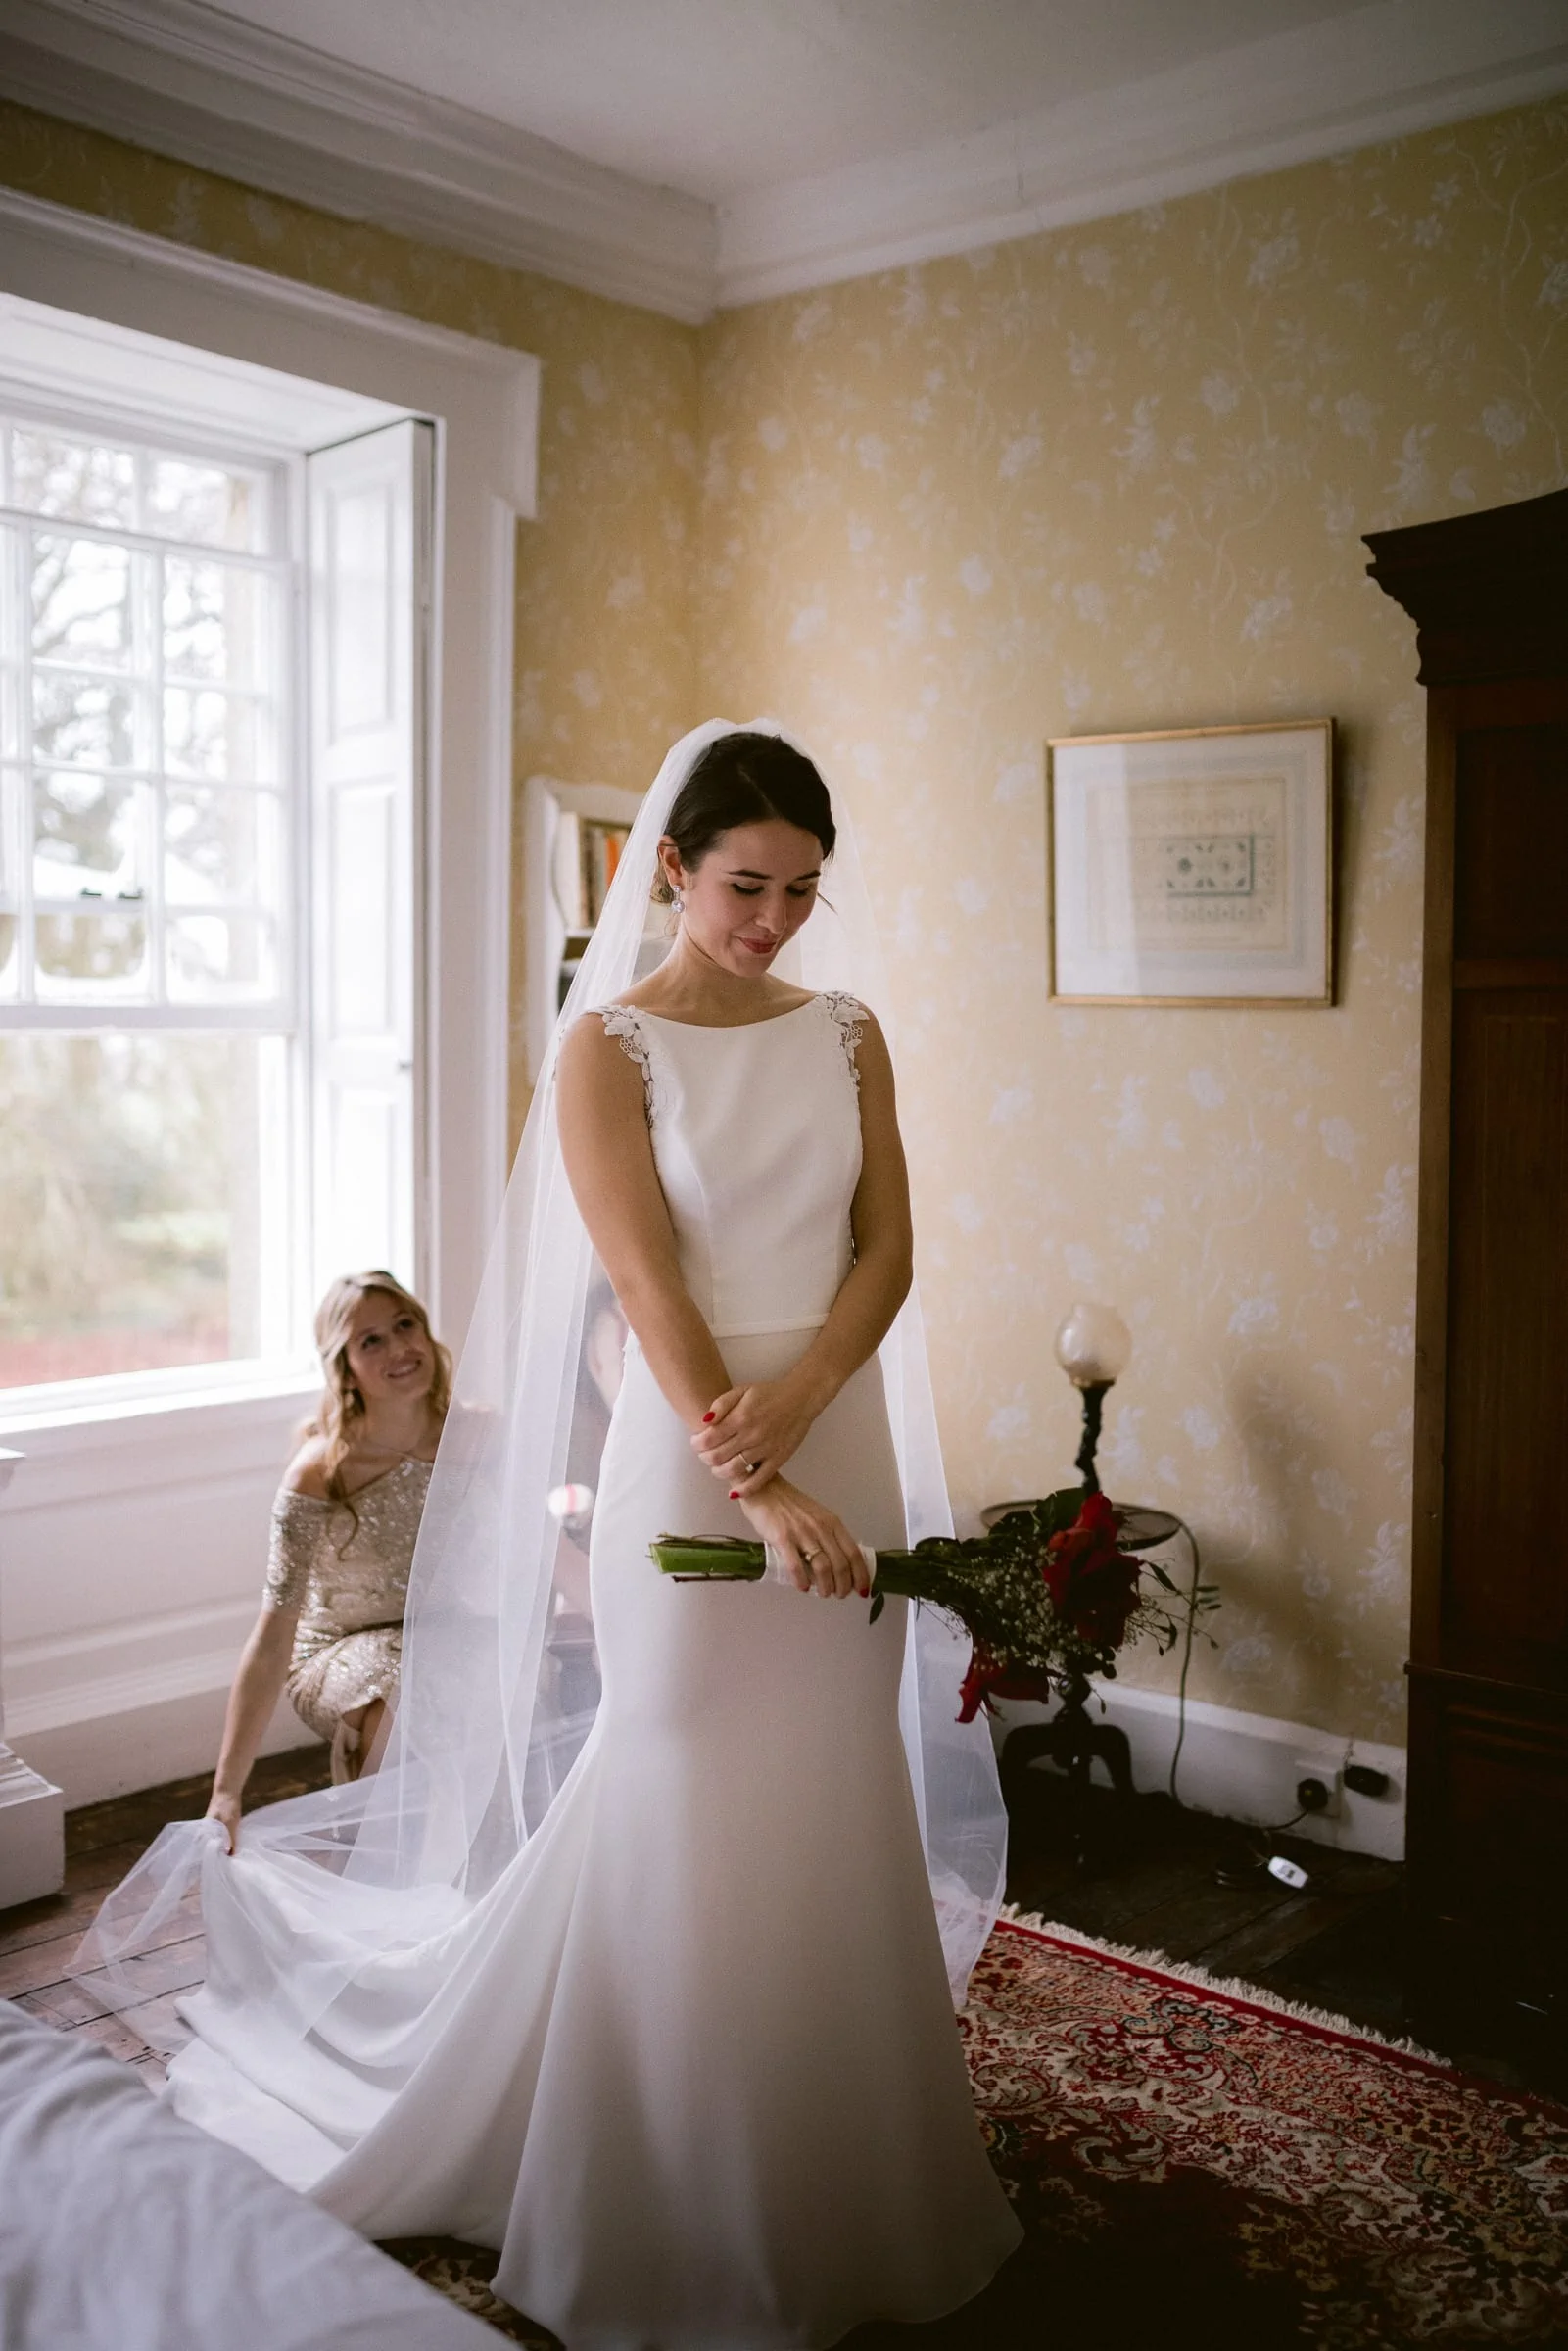 Morning-Preparations-at-Roundwood-House-Wedding-0054